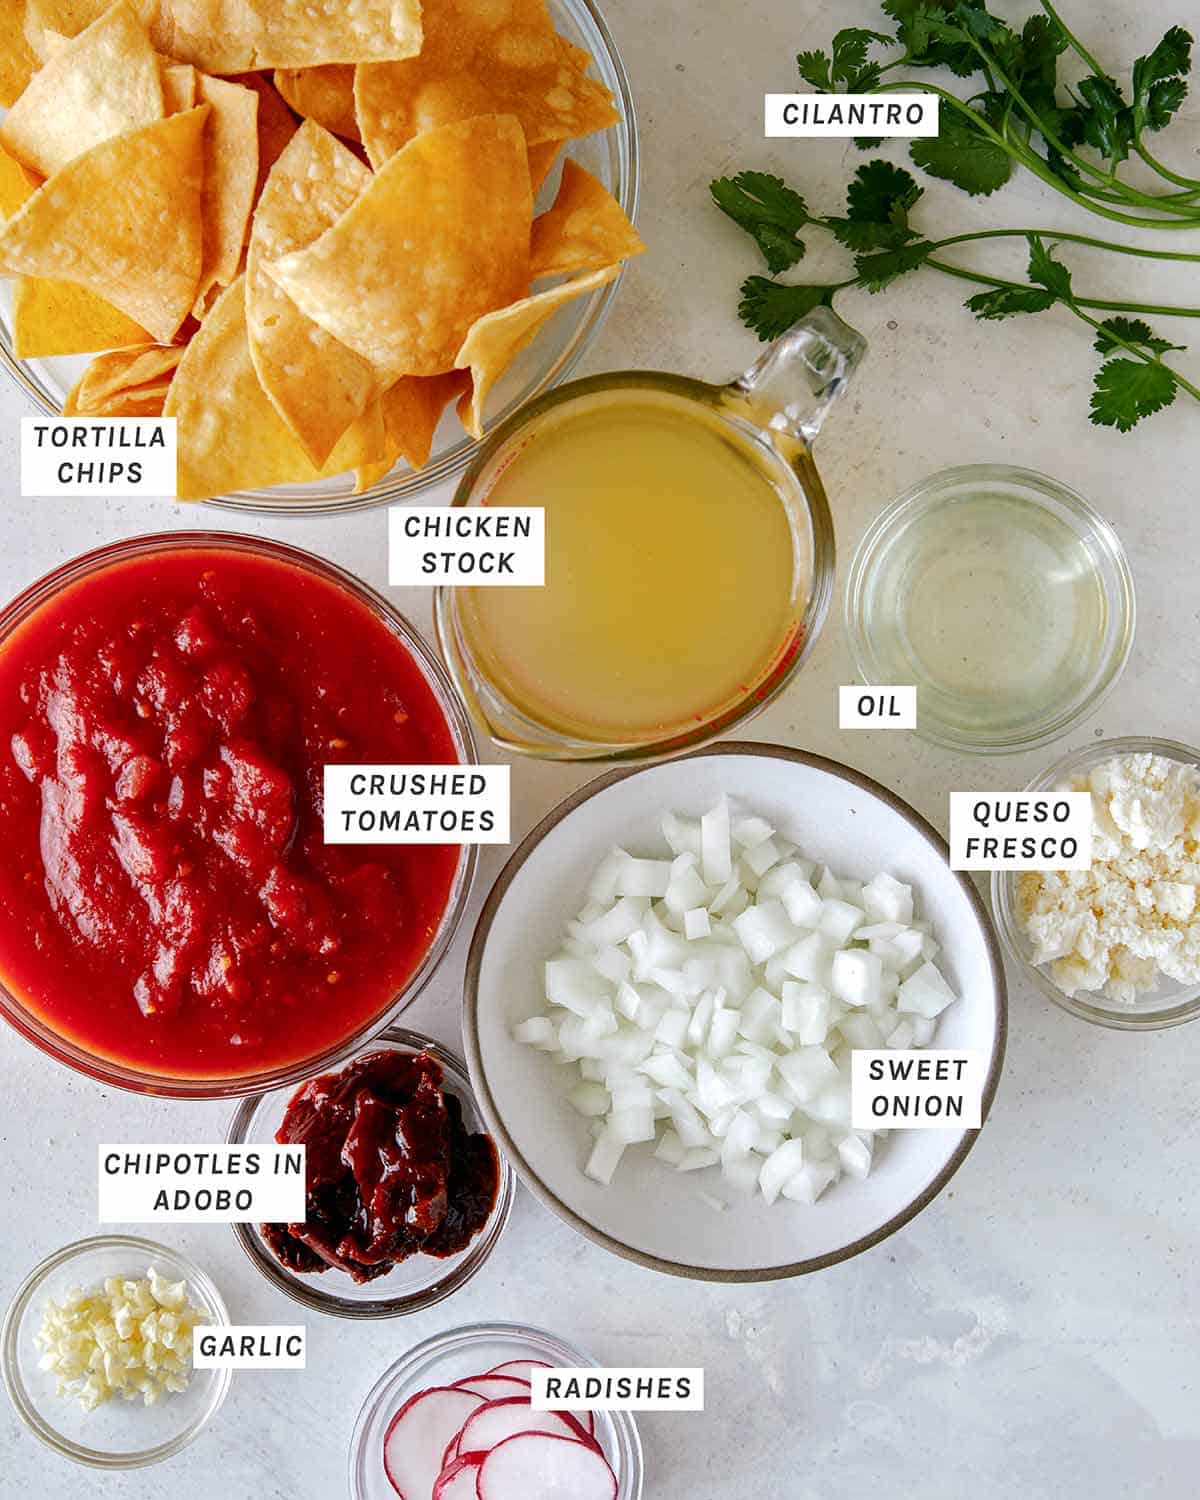 Ingredients for everything you'll need to make chilaquiles